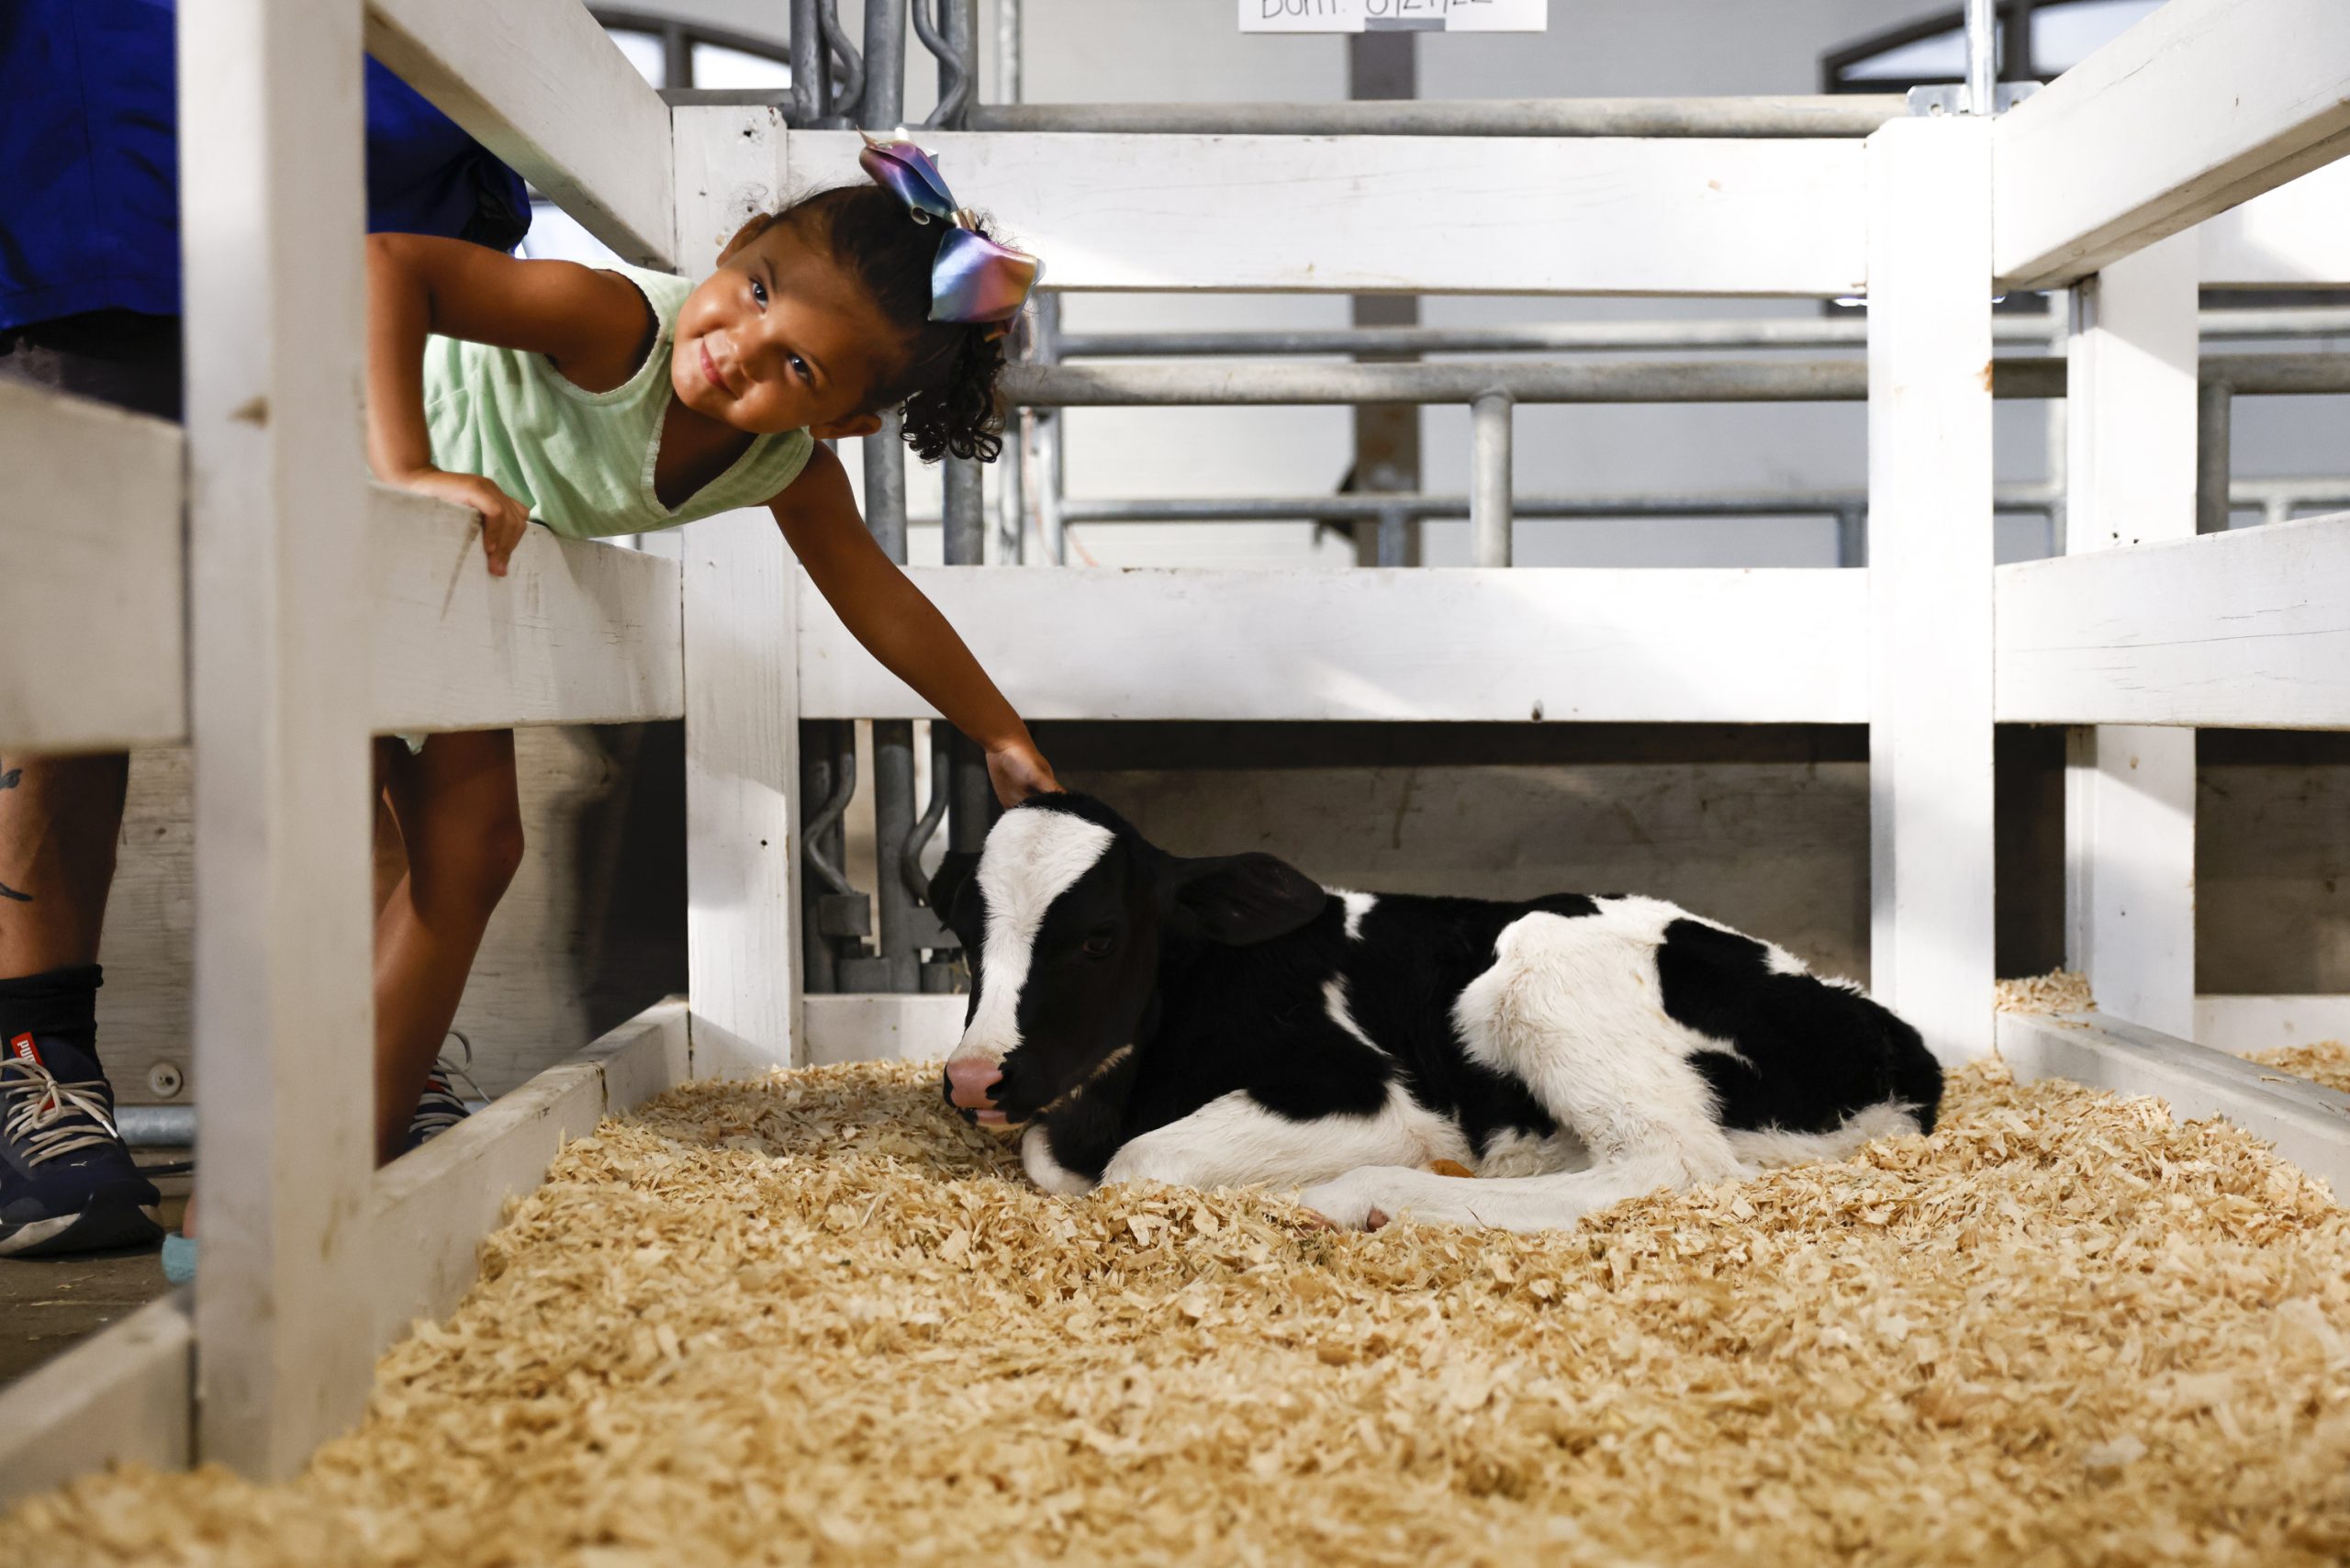 Three-year-old Nova Johnston, visiting with her parents from Canandaigua, looks up at her dad while petting a newborn calf inside the dairy cattle building on Saturday, August 28, 2022, at the New York State Fair in Syracuse, New York.